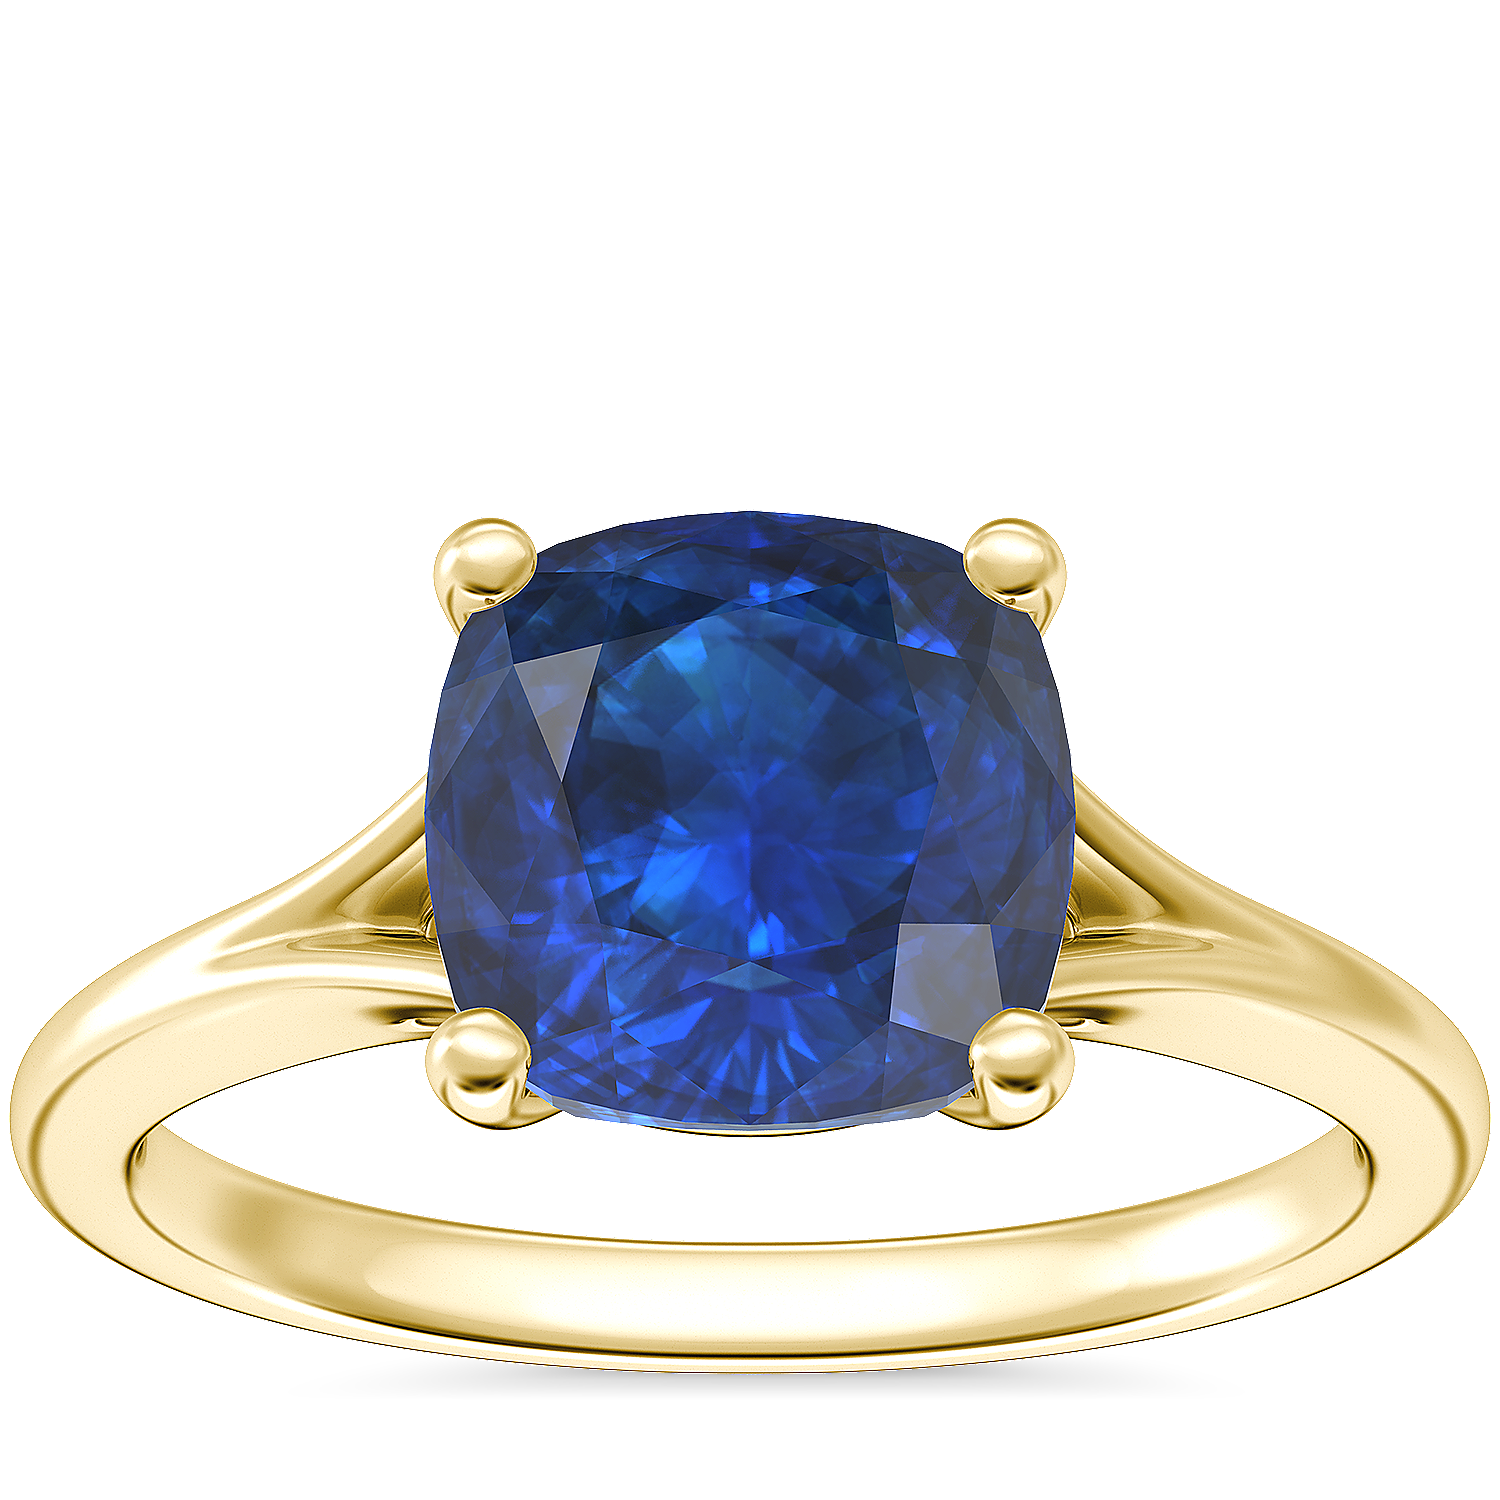 Petite Split Shank Solitaire Engagement Ring with Cushion Sapphire in 14k Yellow Gold (8mm)